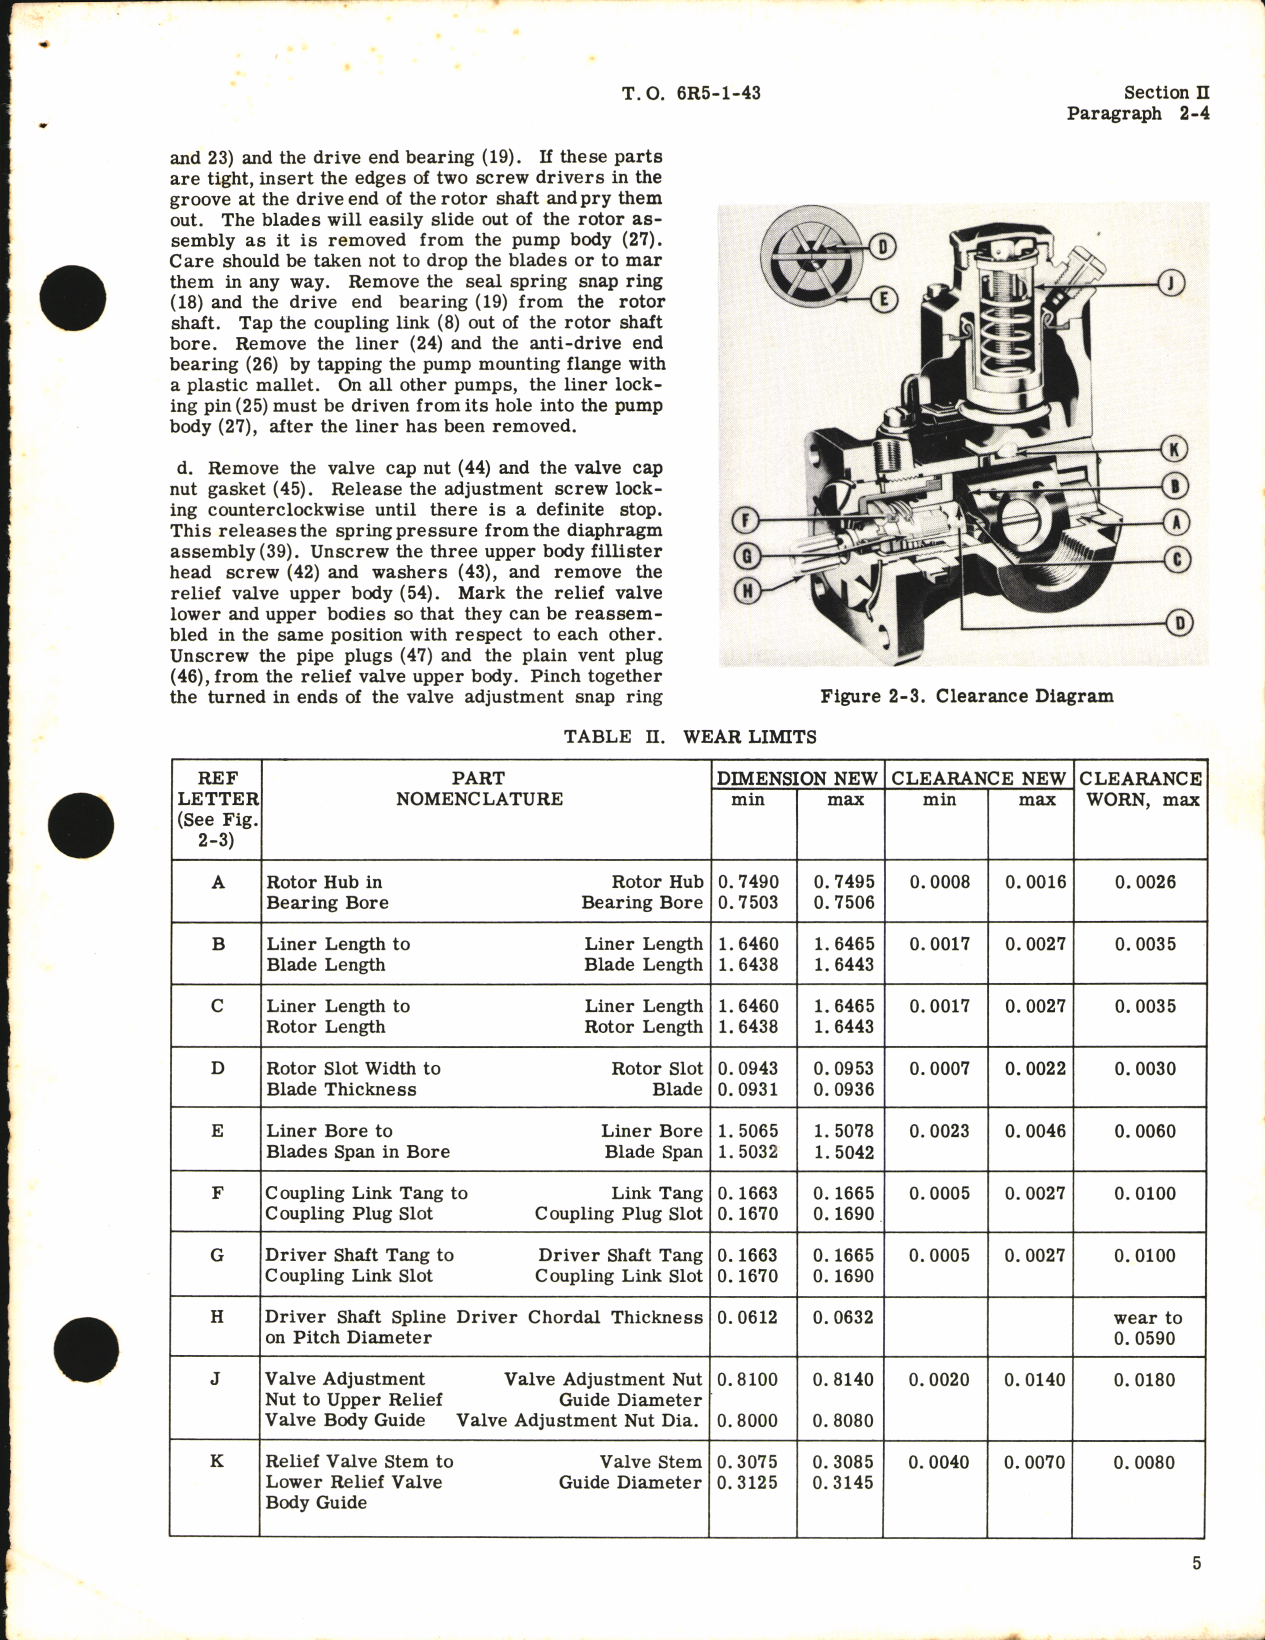 Sample page 7 from AirCorps Library document: Overhaul Instructions for Engine-Driven and Electric Motor-Driven Fuel Pump